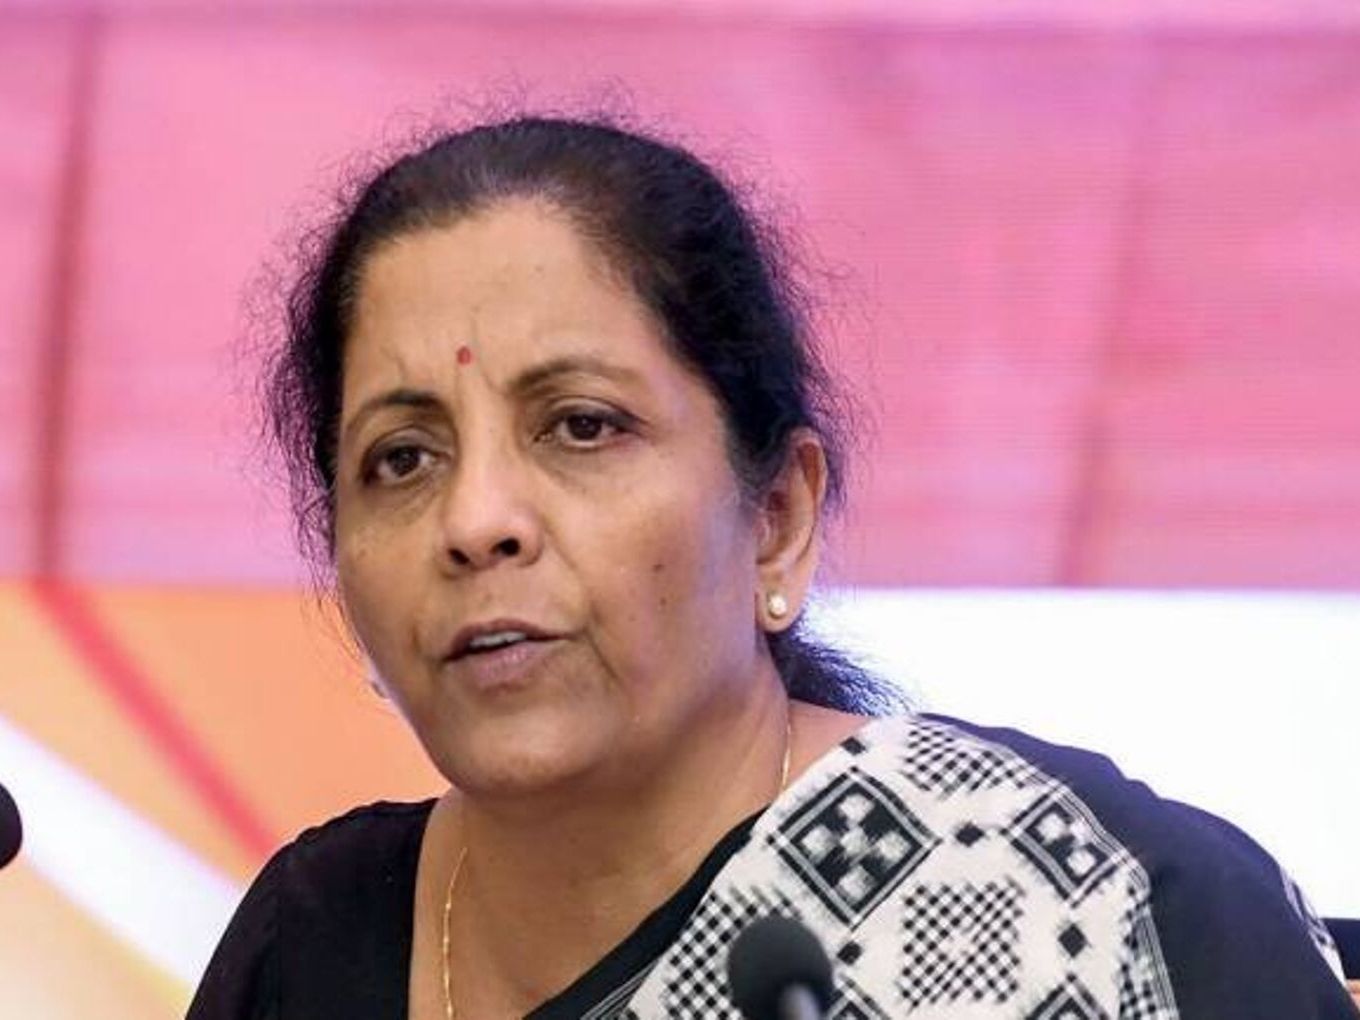 Millenials Prefer Taking Cabs Hence Lower Auto Sales, Says FM Sitharaman